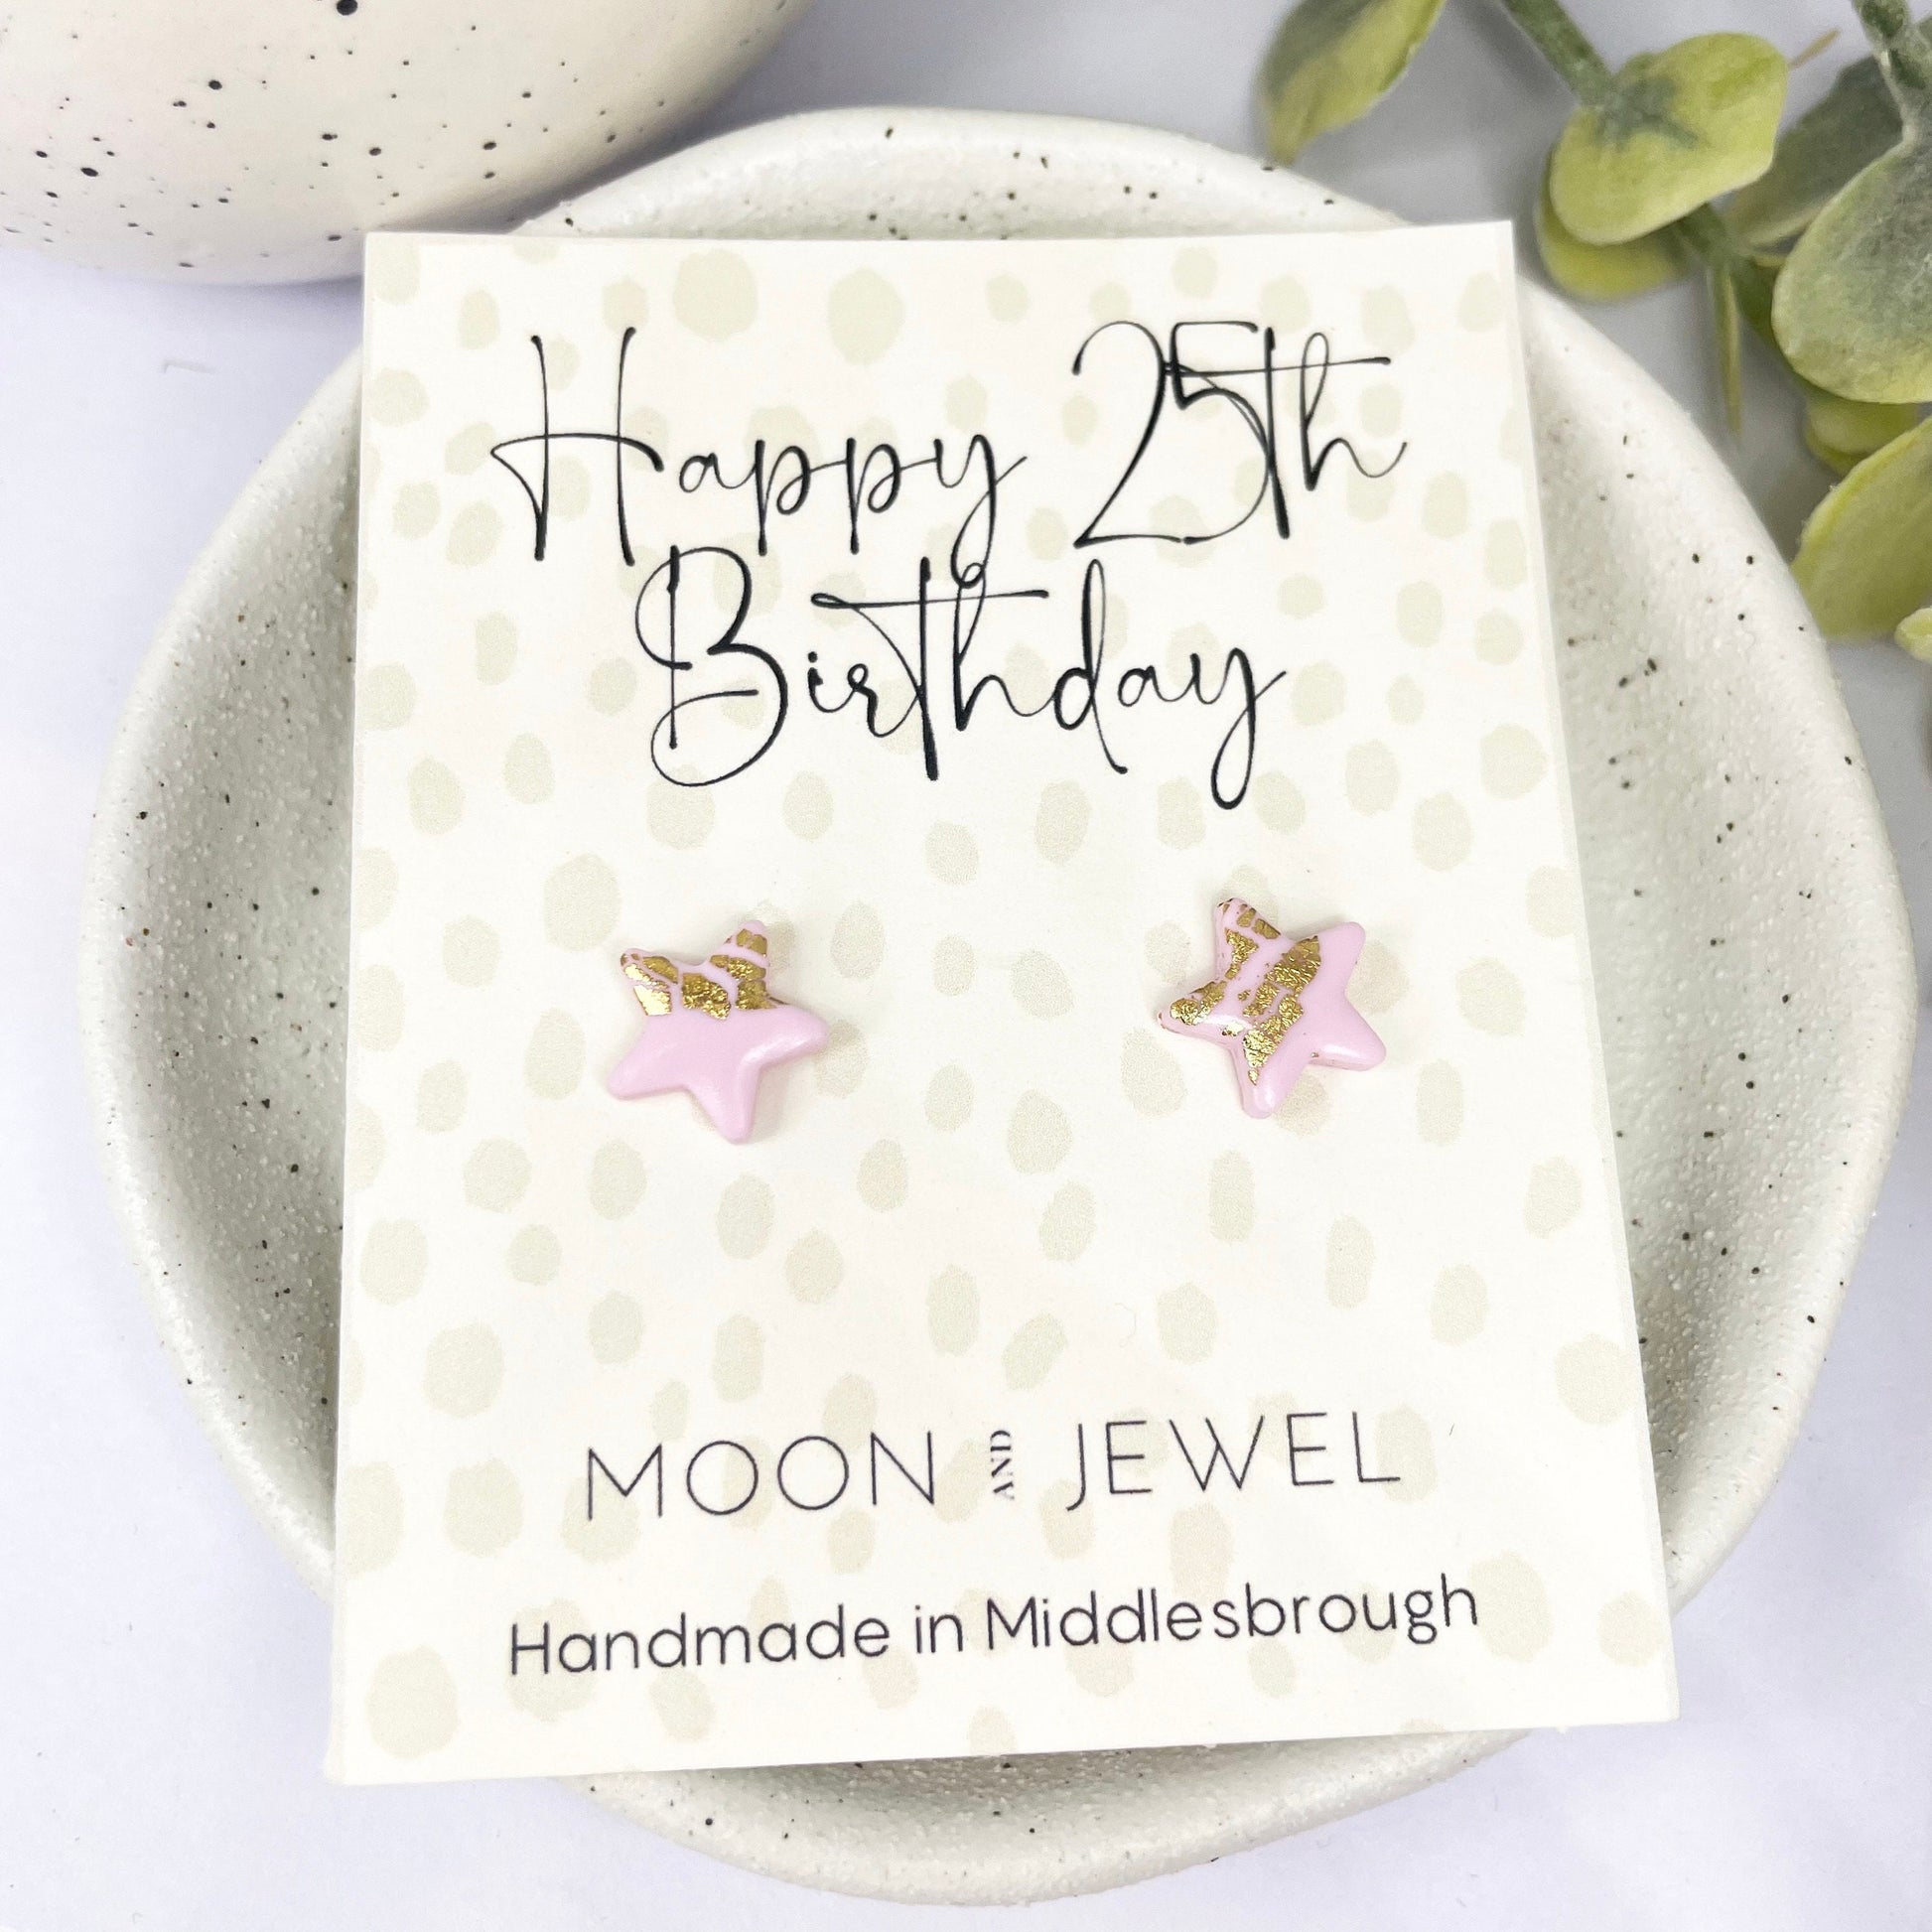 25th birthday gift for her, 25th birthday earrings, 25th birthday gift for sister, 25th birthday gift best friend, daughter 25th birthday